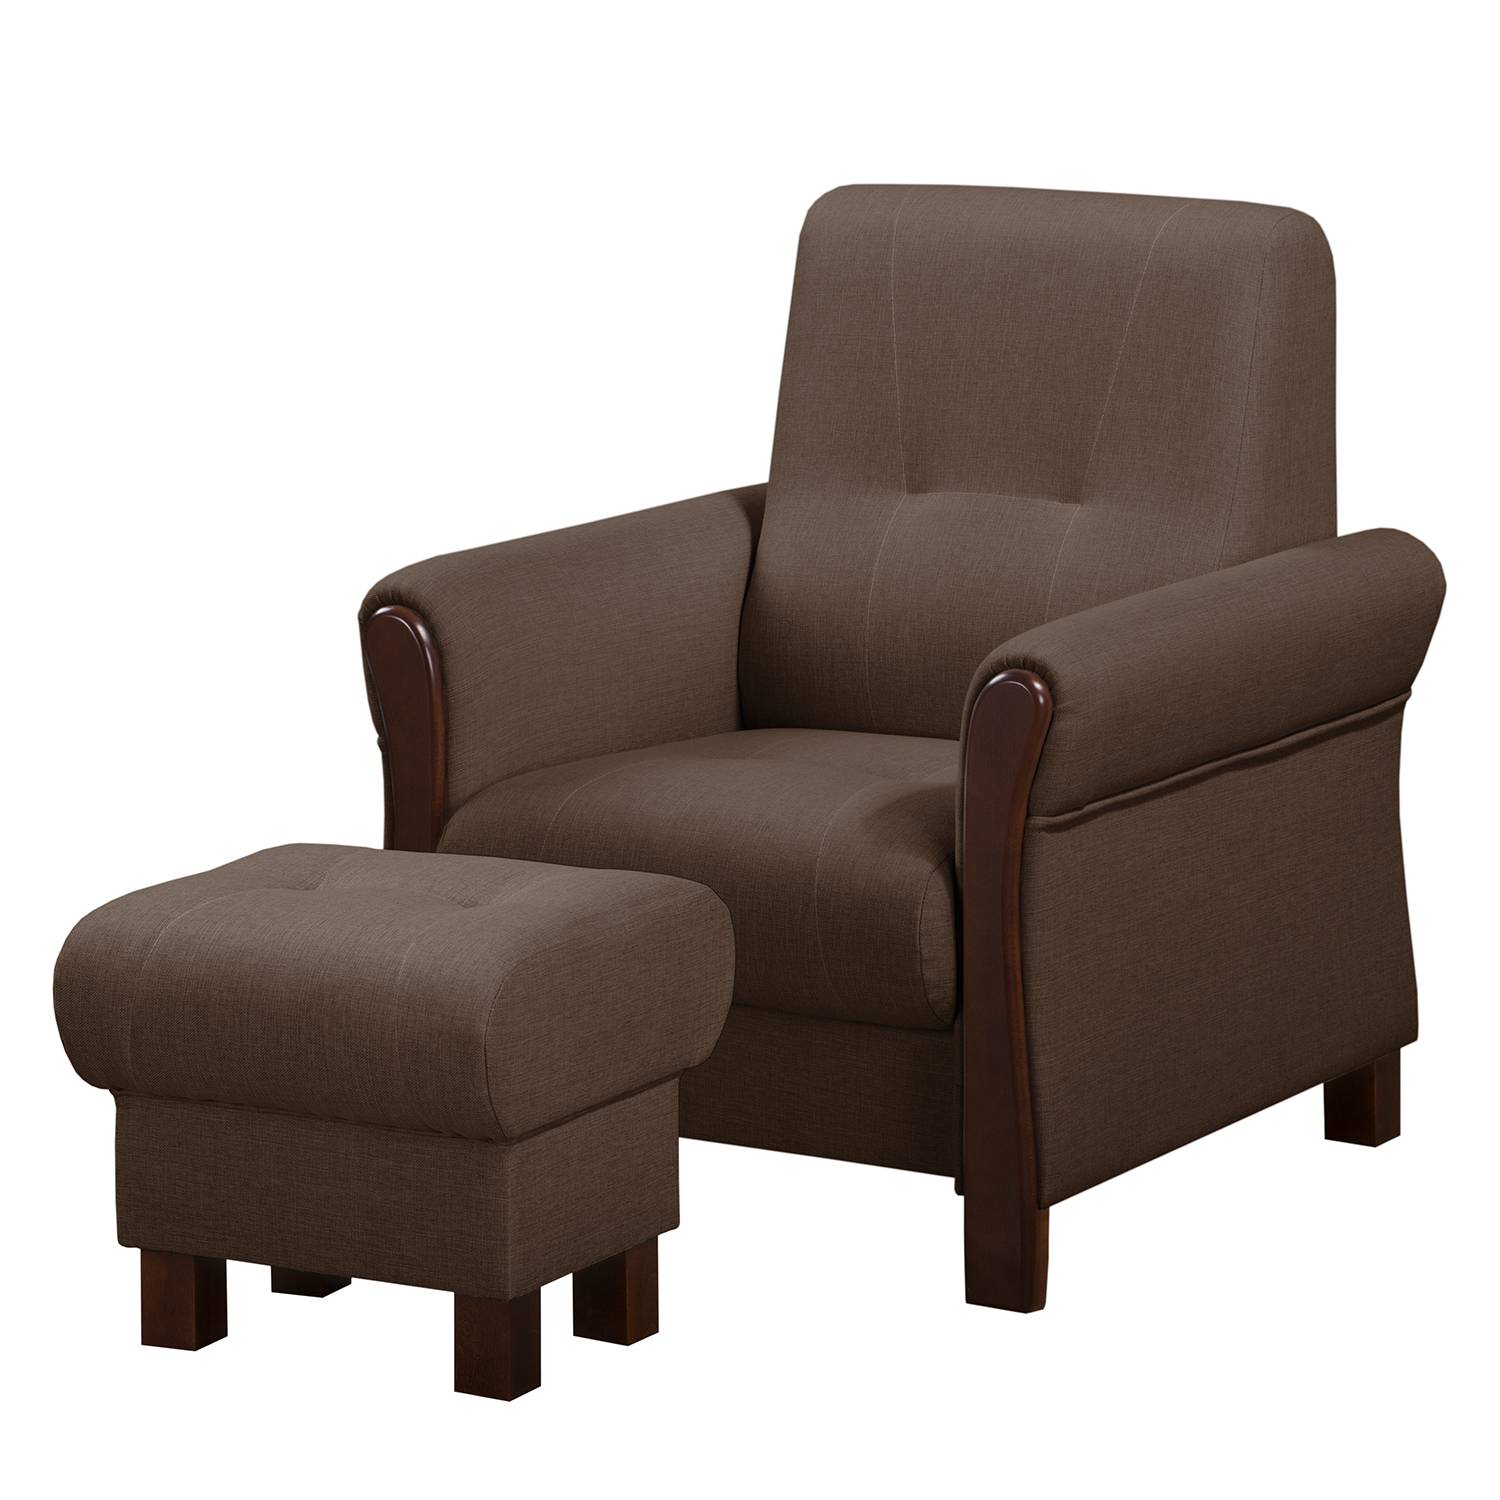 Image of Fauteuil Outwell 000000001000120200